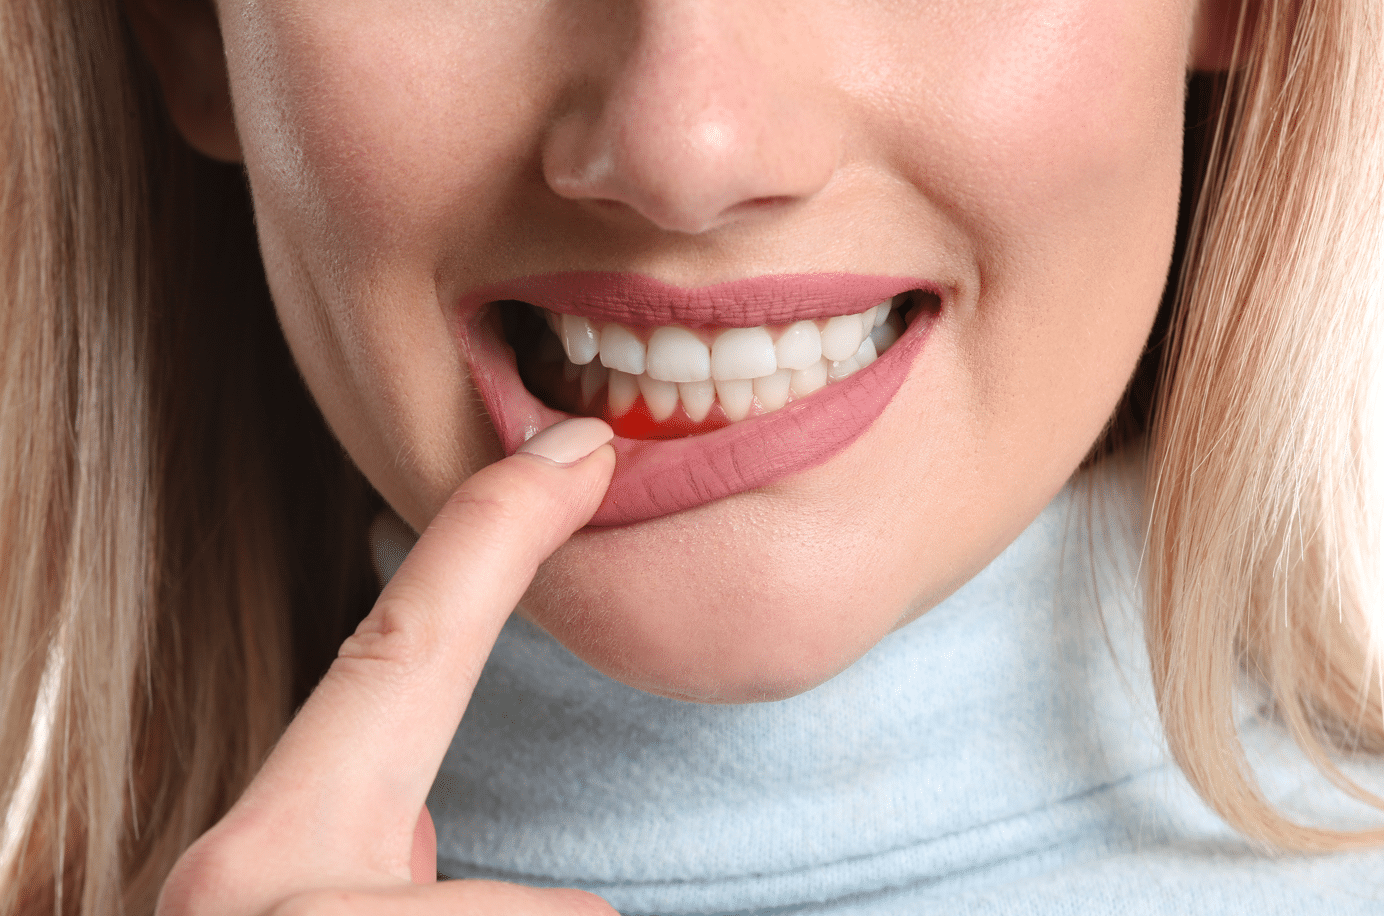 Periodontal Therapy Denver periodontal therapy for woman with gum disease Dr. Rossow DDS, Laura Noce DMD, Joseph Burns DDS, Cheri Neal DDS. Aspen Dental General, Cosmetic, Restorative, Preventative, Family Dentistry dentist in Denver CO 80206